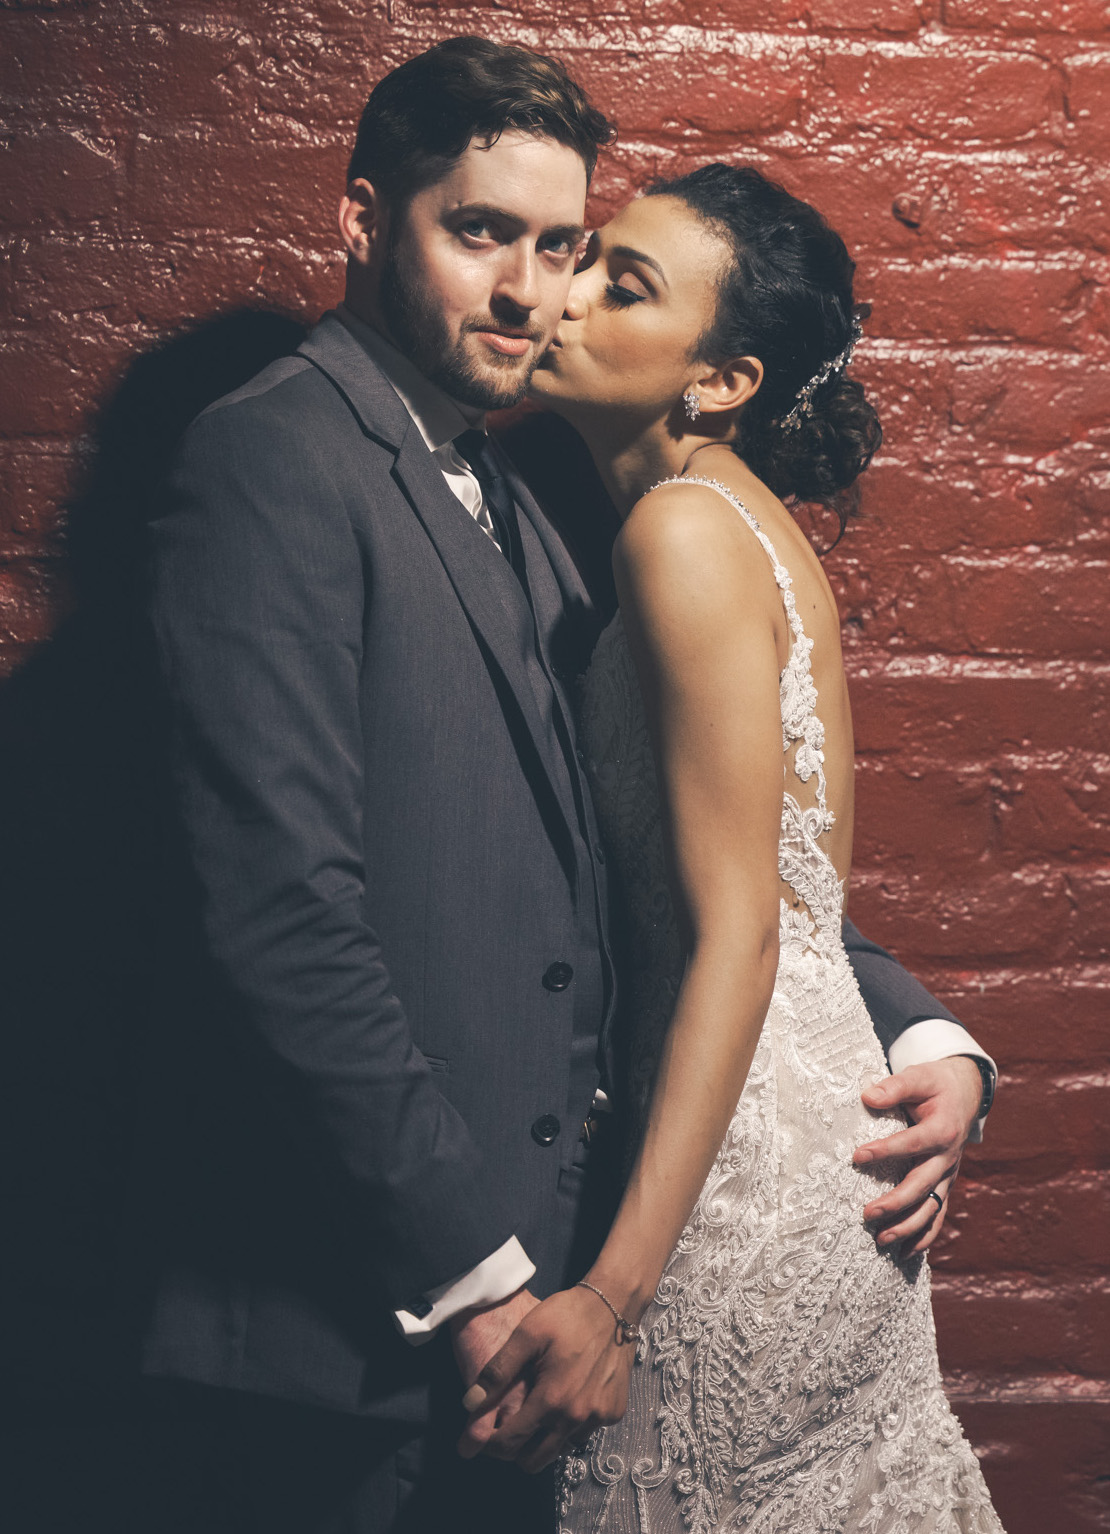 A bride and groom stand against a red brick wall in New Orleans.